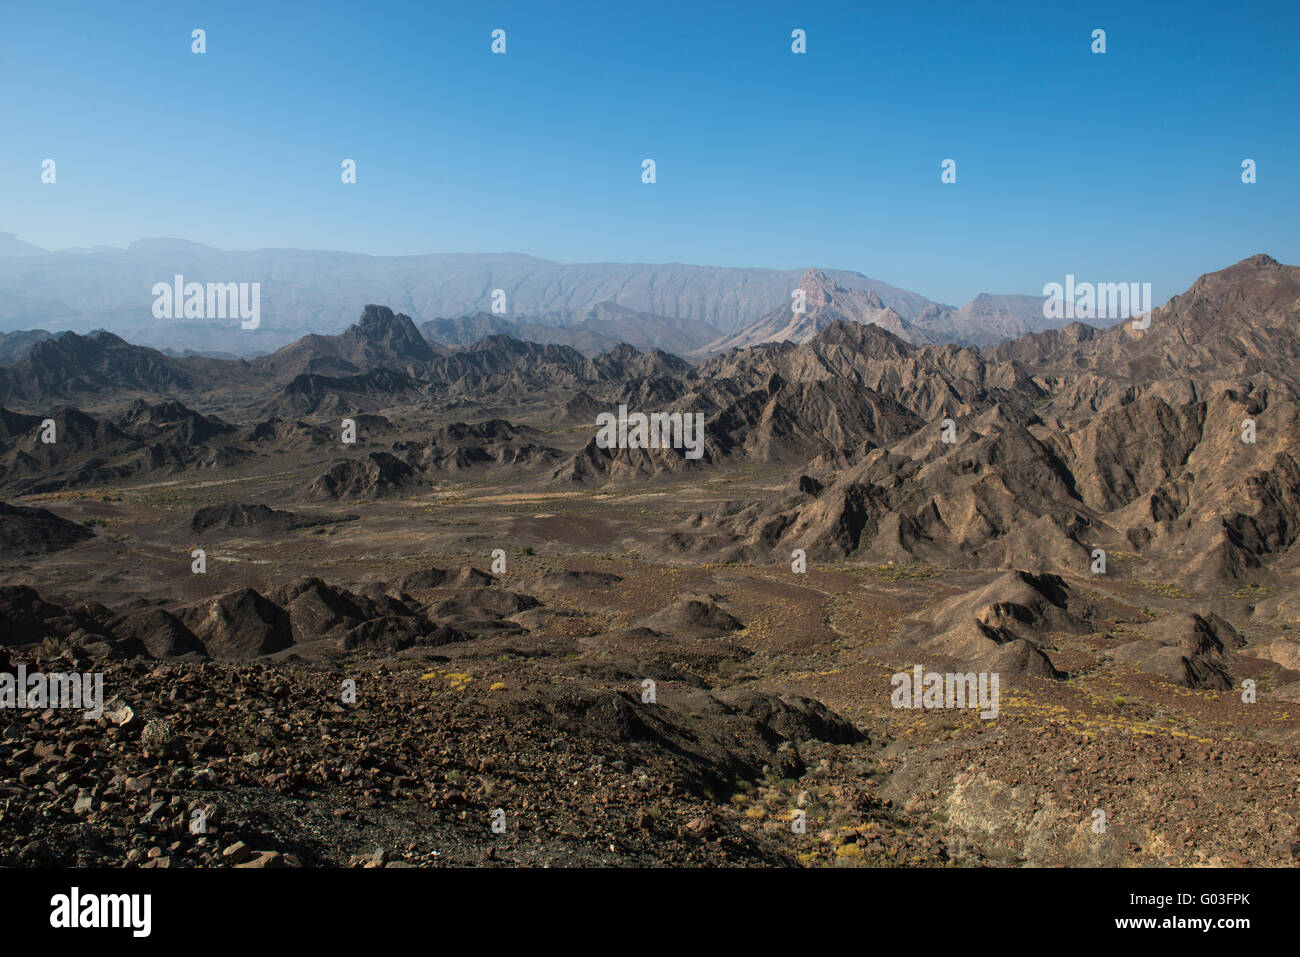 Landscape in the Hajar Mountains Stock Photo